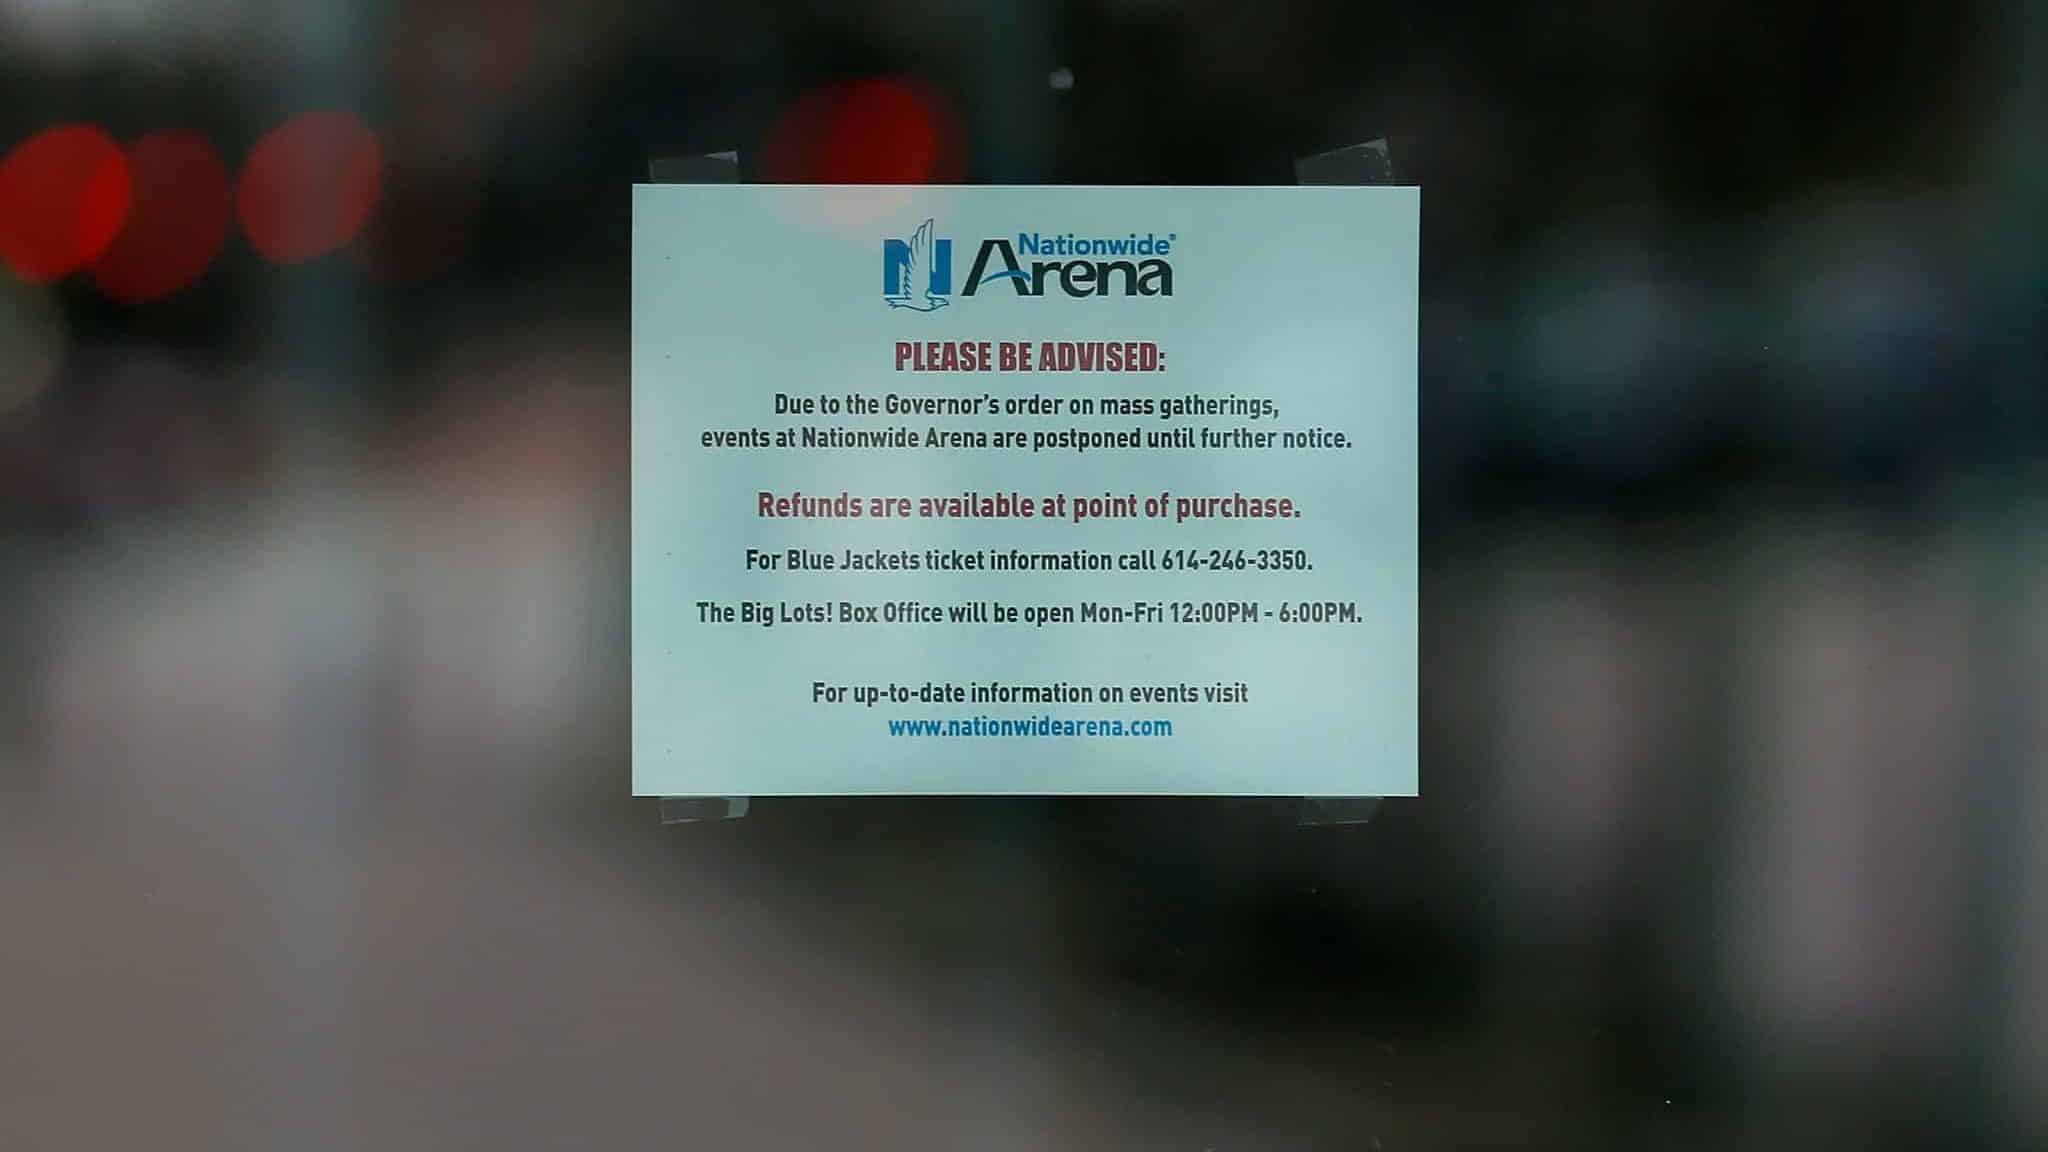 COLUMBUS, OH - MARCH 12: A sign posted on an entrance door to Nationwide Arena alerts fans that all events at the arena have been postponed on March 12, 2020 in Columbus, Ohio. The game between the Columbus Blue Jackets and the Pittsburgh Penguins was canceled after the NHL's decision to suspend the remaining games in the season due to the continuing outbreak of the coronavirus (COVID-19).